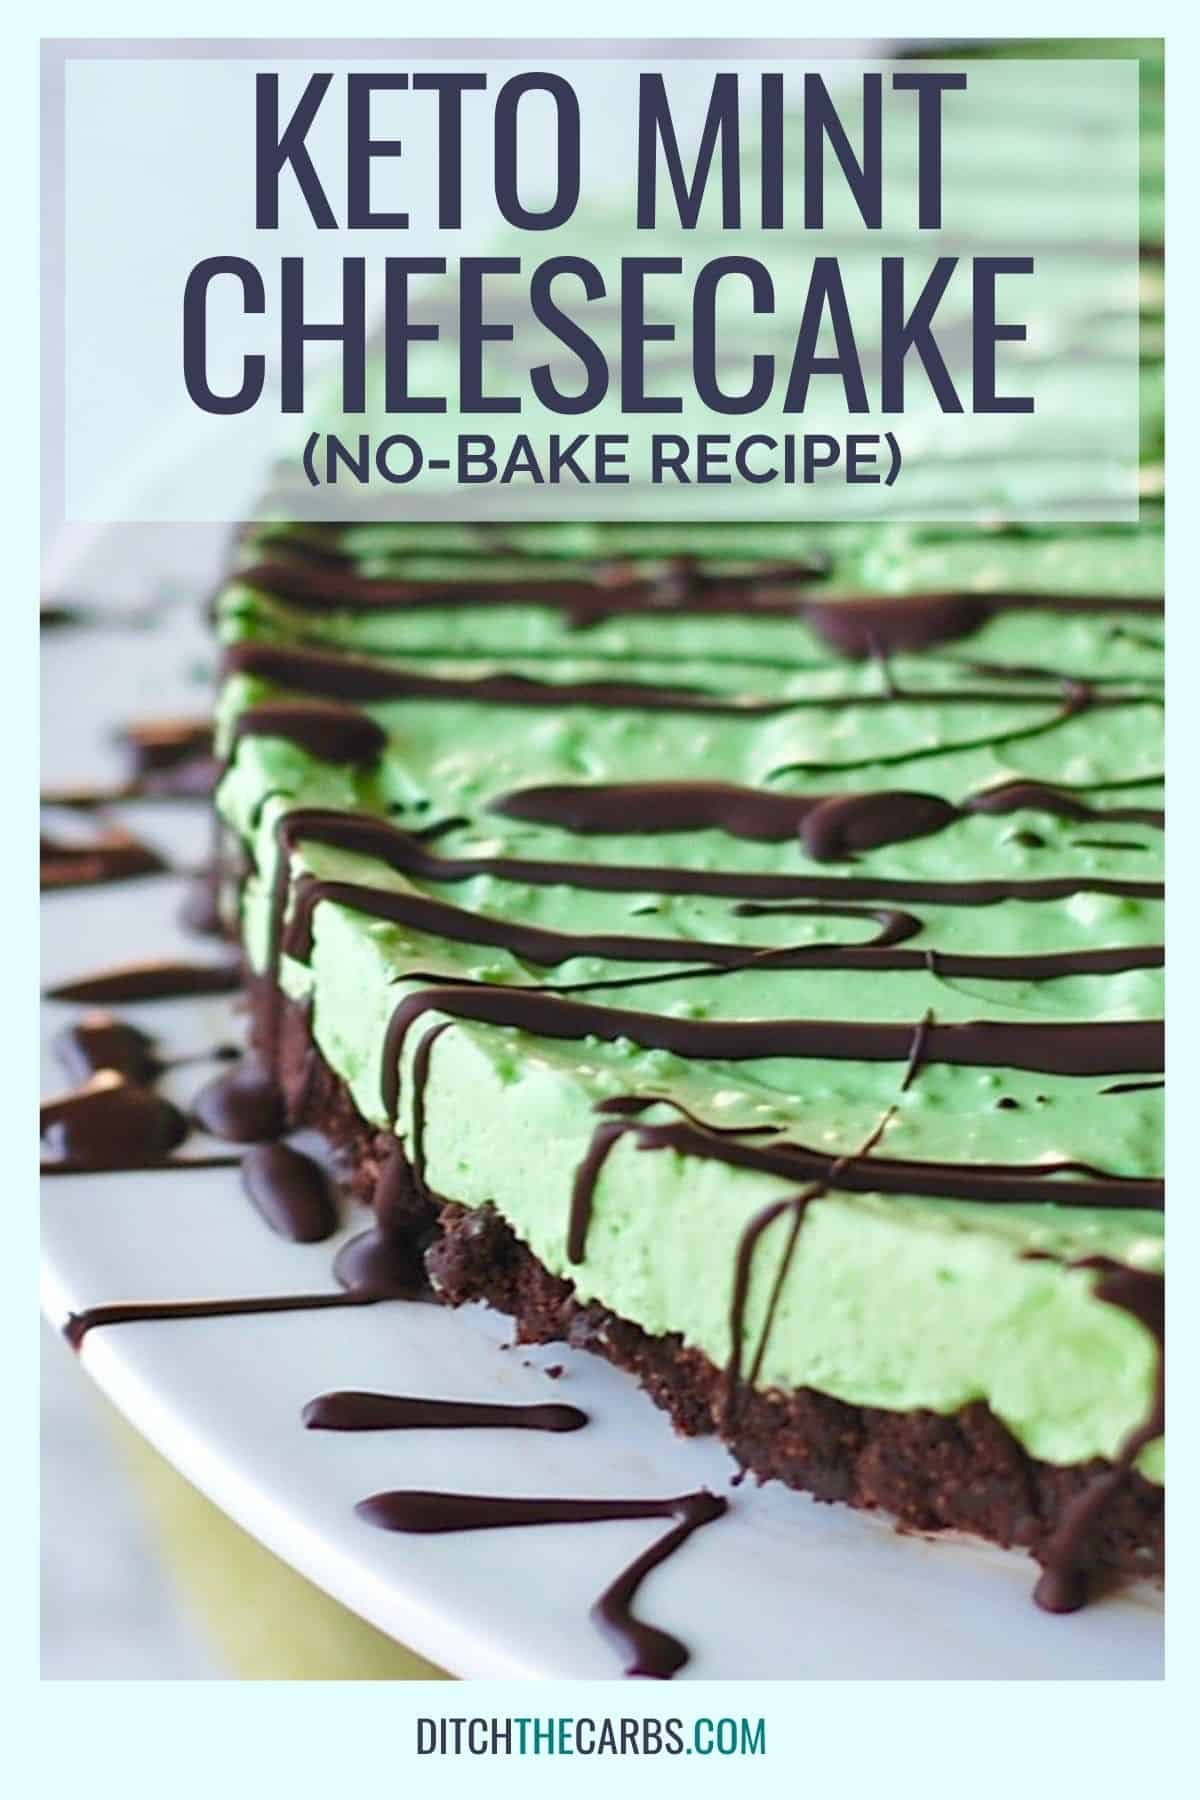 No-Bake Sugar-Free Mint Cheesecake drizzled with chocolate and served on a white cake stand